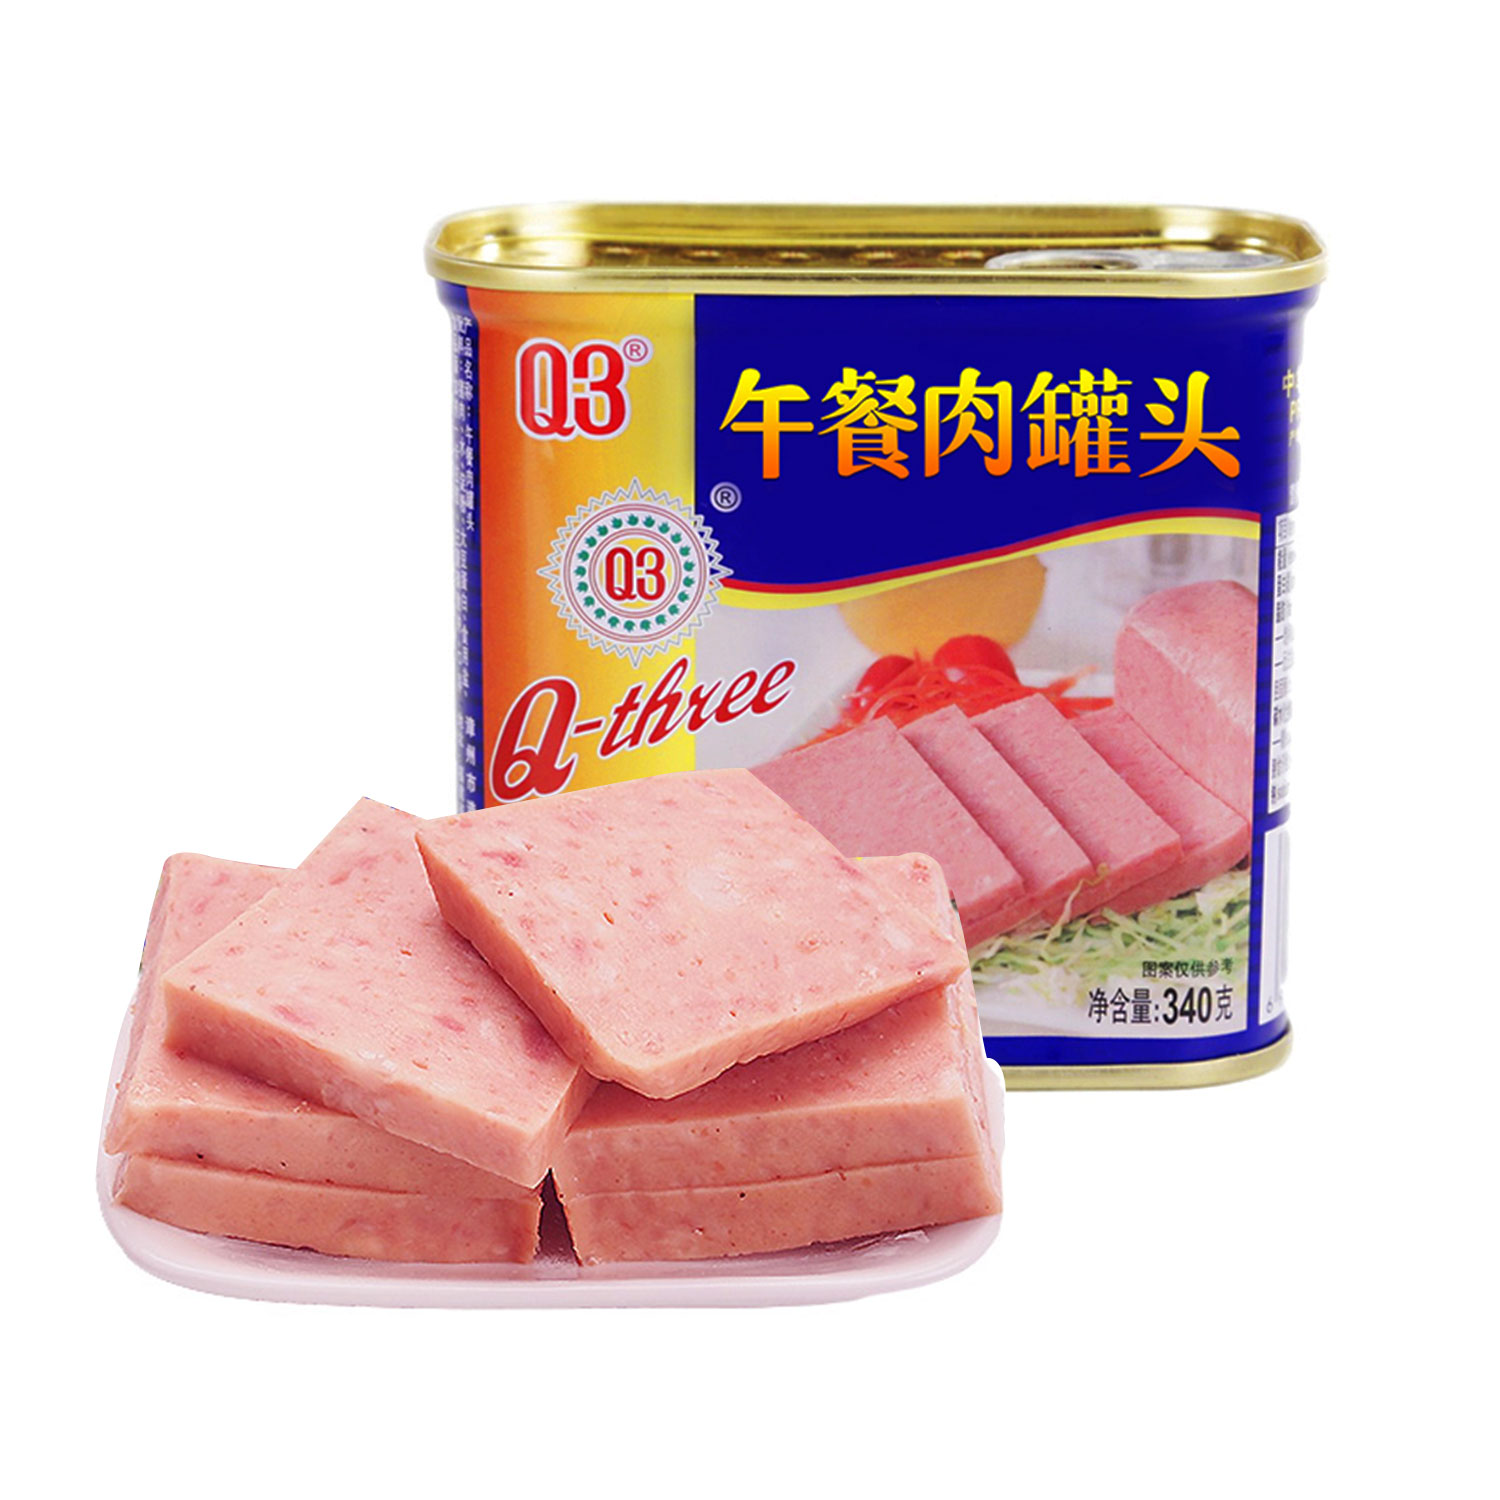 Q3 Pork Luncheon Meat 340g-eBest-Condiments,Pantry